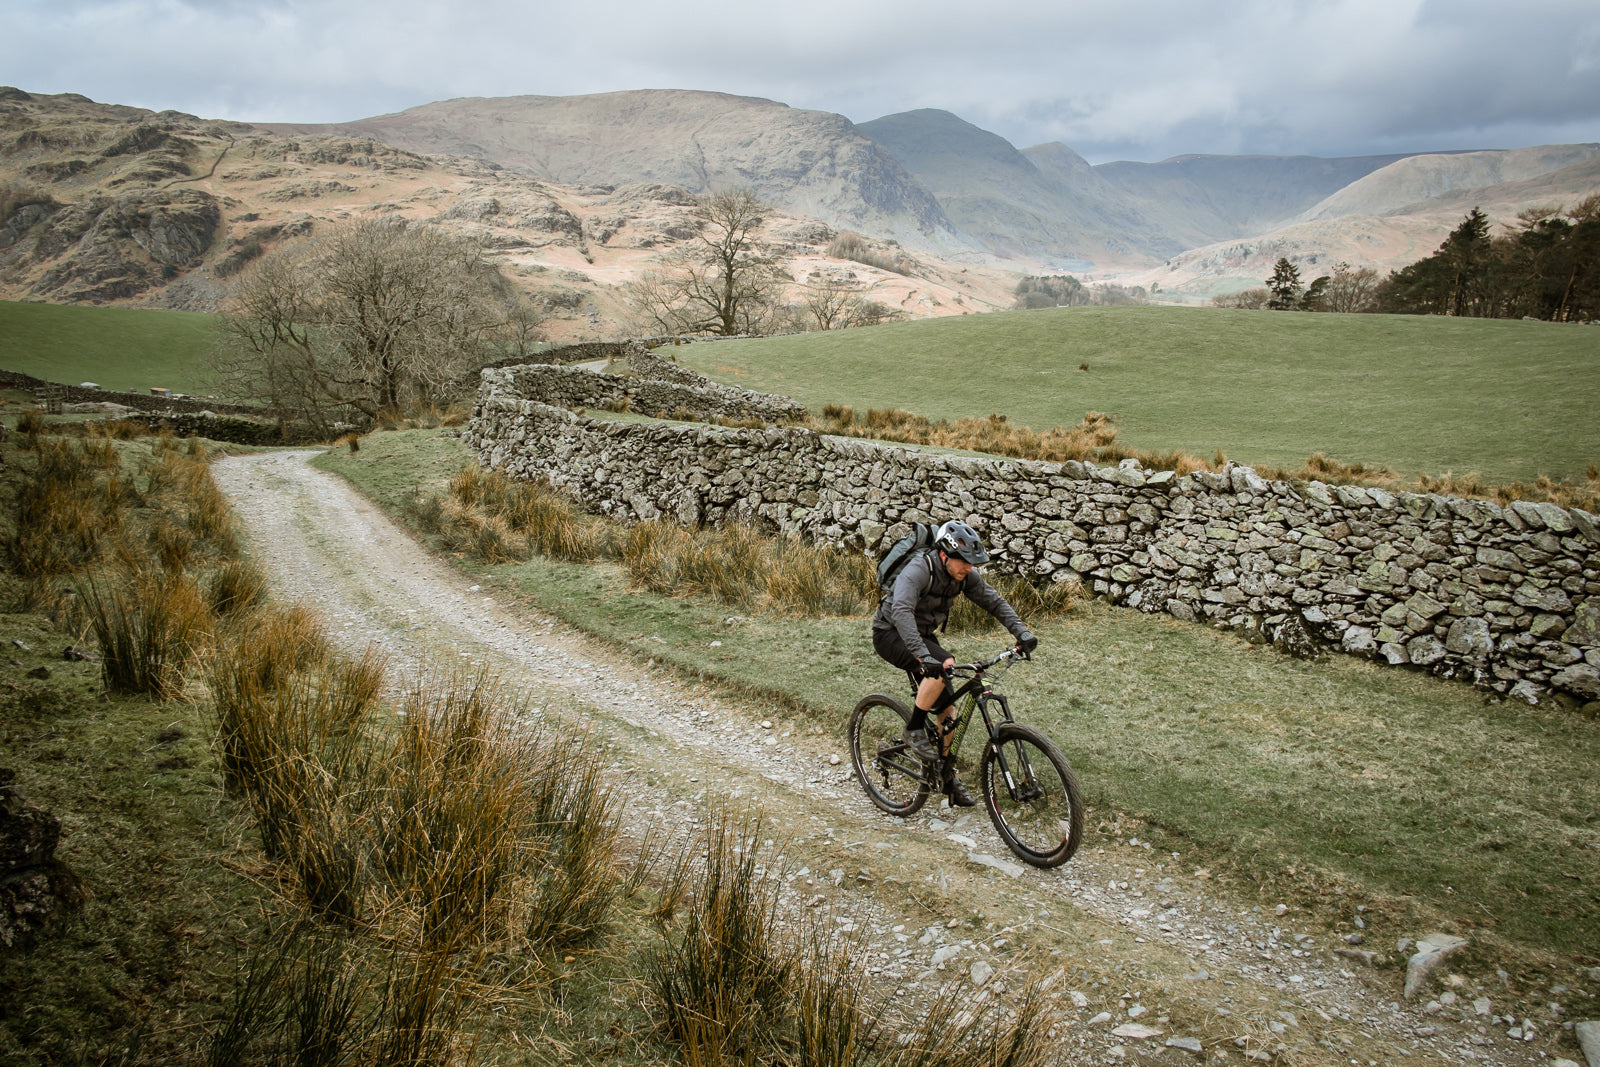 Mission Workshop Field Test : Riding Lake District. Spring 2014 - the English Lake District - Featuring Andy Waterman, Stif Cycles, Santa Cruz Bicycles, Sram.